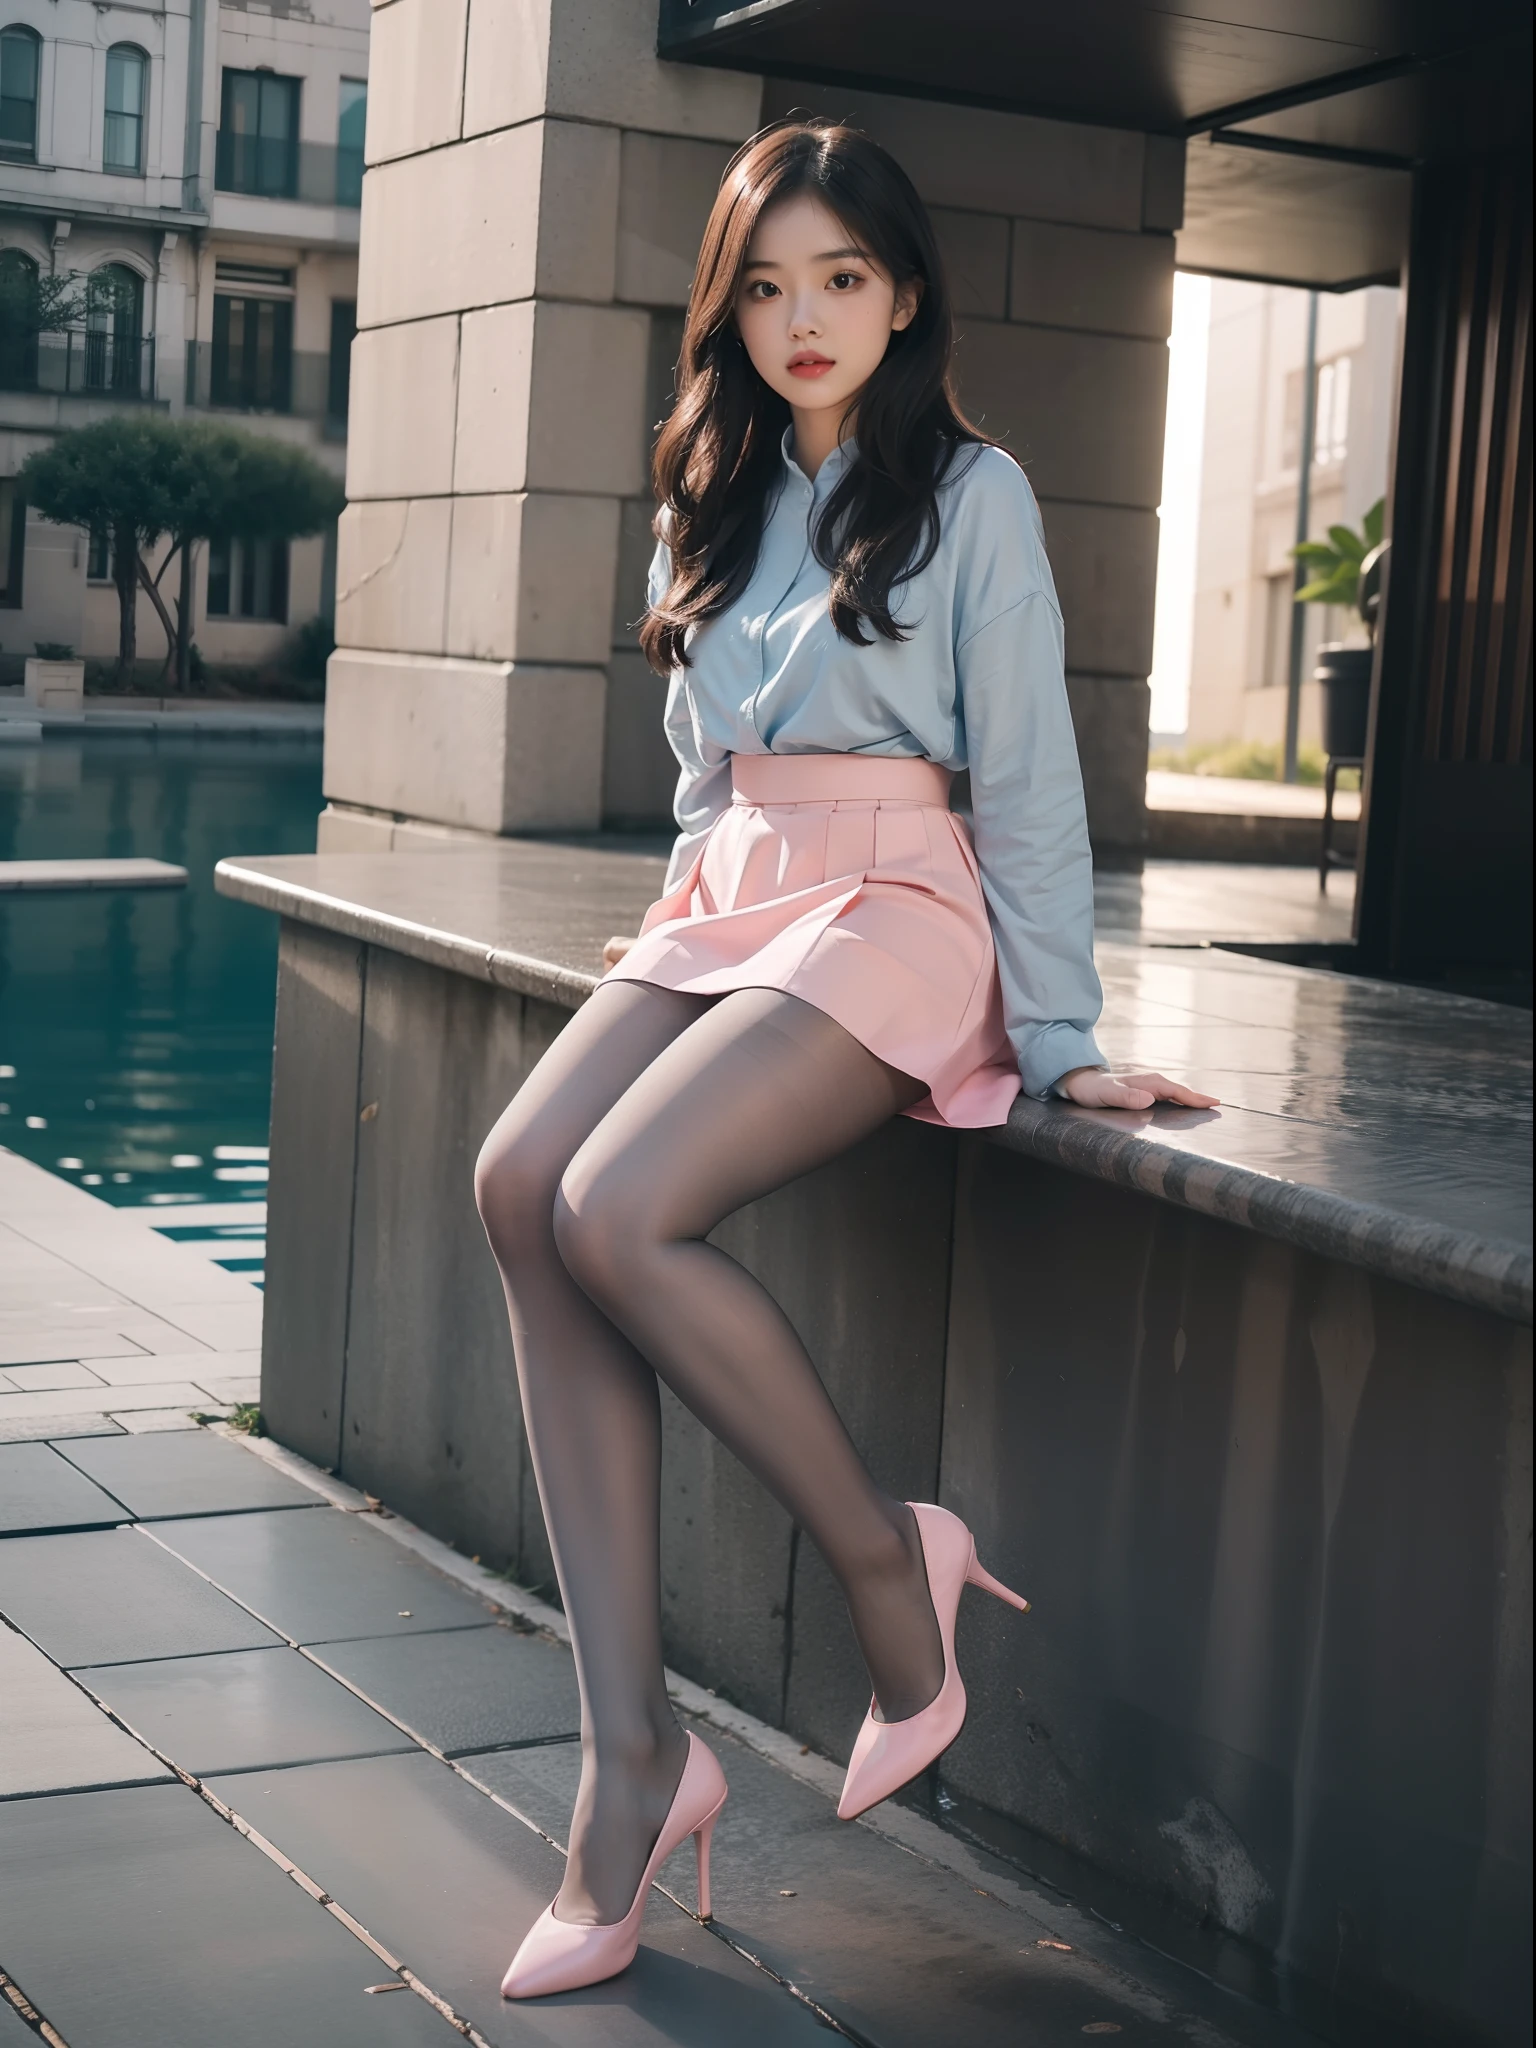 (full body:1.5)，(1girl:1.3),(view the viewer:1.4)，(anatomy correct:1.3),(Sitting on the sea:1.2),(A pink and blue Elastic skirt :1.2),( DimGray Pantyhose:1.3),( girl pointed thick heels :1.1)，(Accurate and perfect face:1.3),hyper HD, Ray traching, reflective light， structurally correct, Award-Awarded, high detail, lighten shade contrast, Face lighting ，cinematic lighting, masterpiece, super detailing, high quality, high detail, best quality, 16k，High contrast,